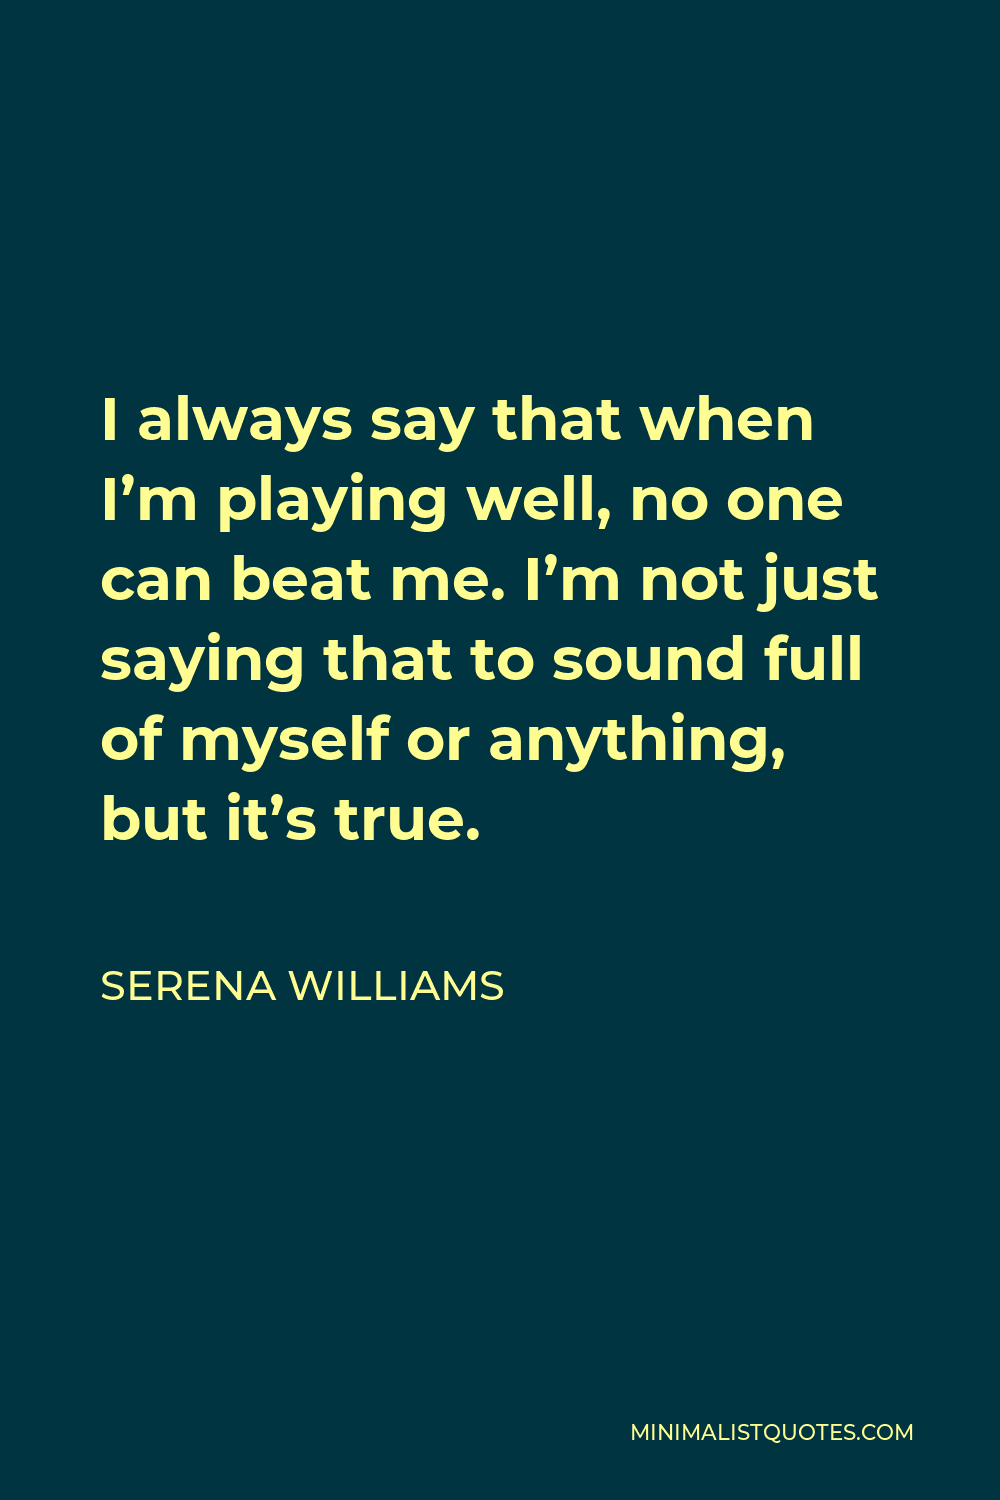 Serena Williams Quote - I always say that when I’m playing well, no one can beat me. I’m not just saying that to sound full of myself or anything, but it’s true.